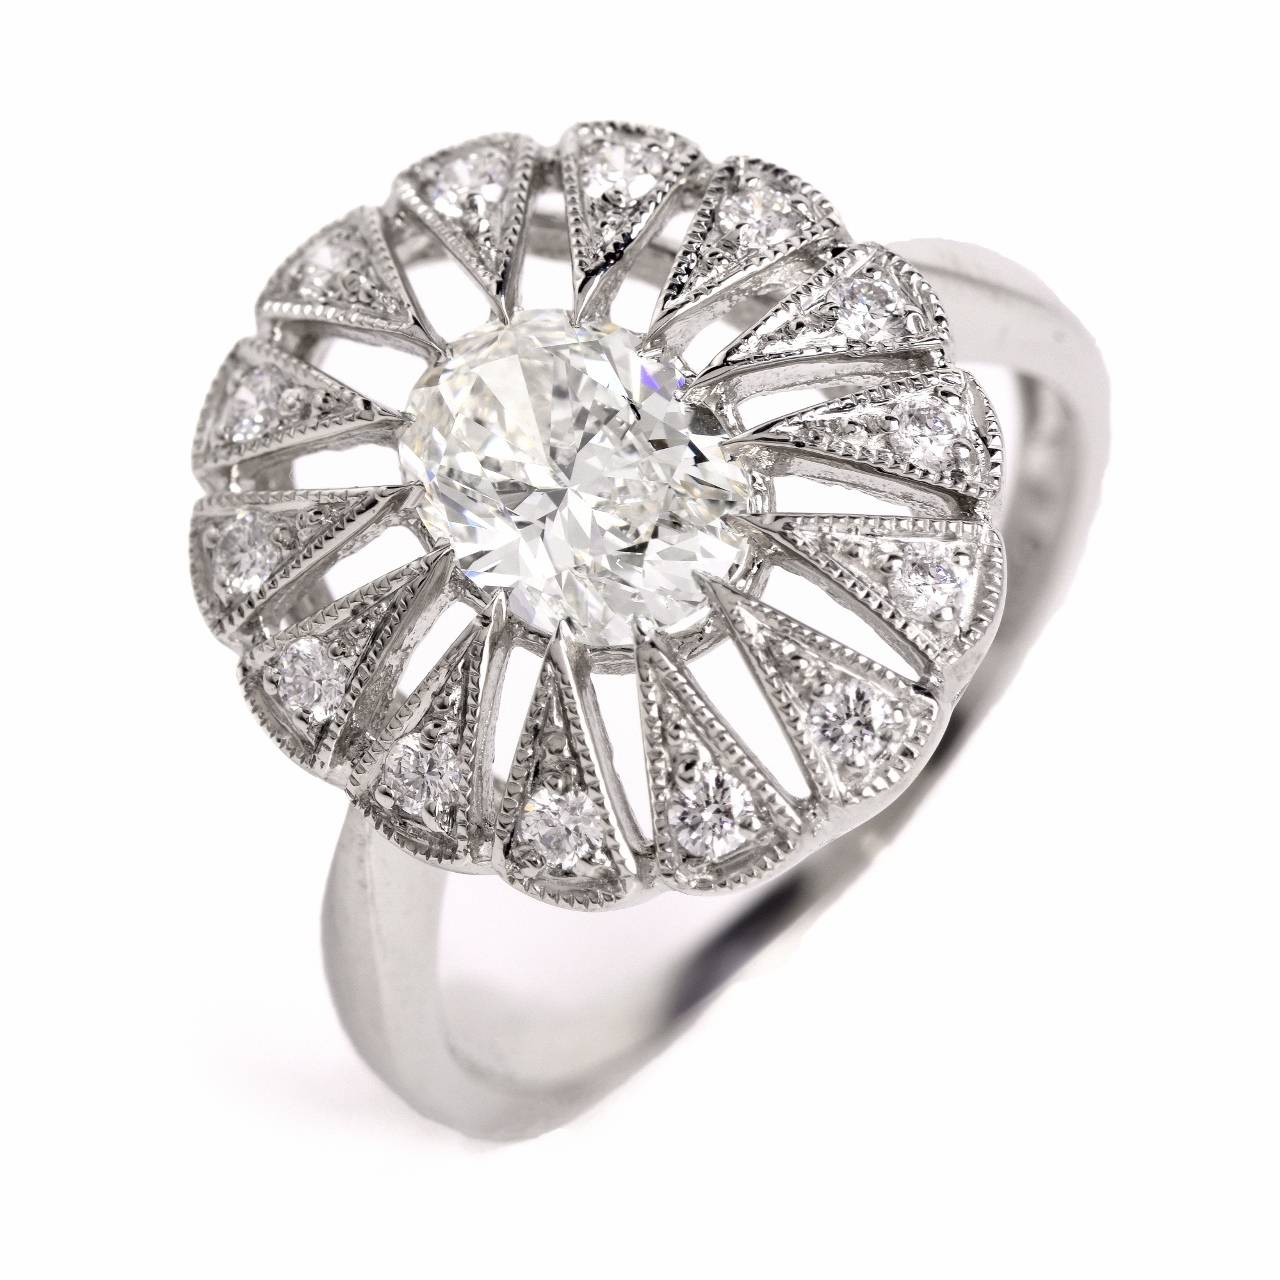 This conspicuous engagement ring of unsurpassed refinement and aesthetic grace epitomizes the monochromatic rings of the affluent Edwardian era, in which quality diamonds were the preferred precious stones par excellence, combined with alluringly